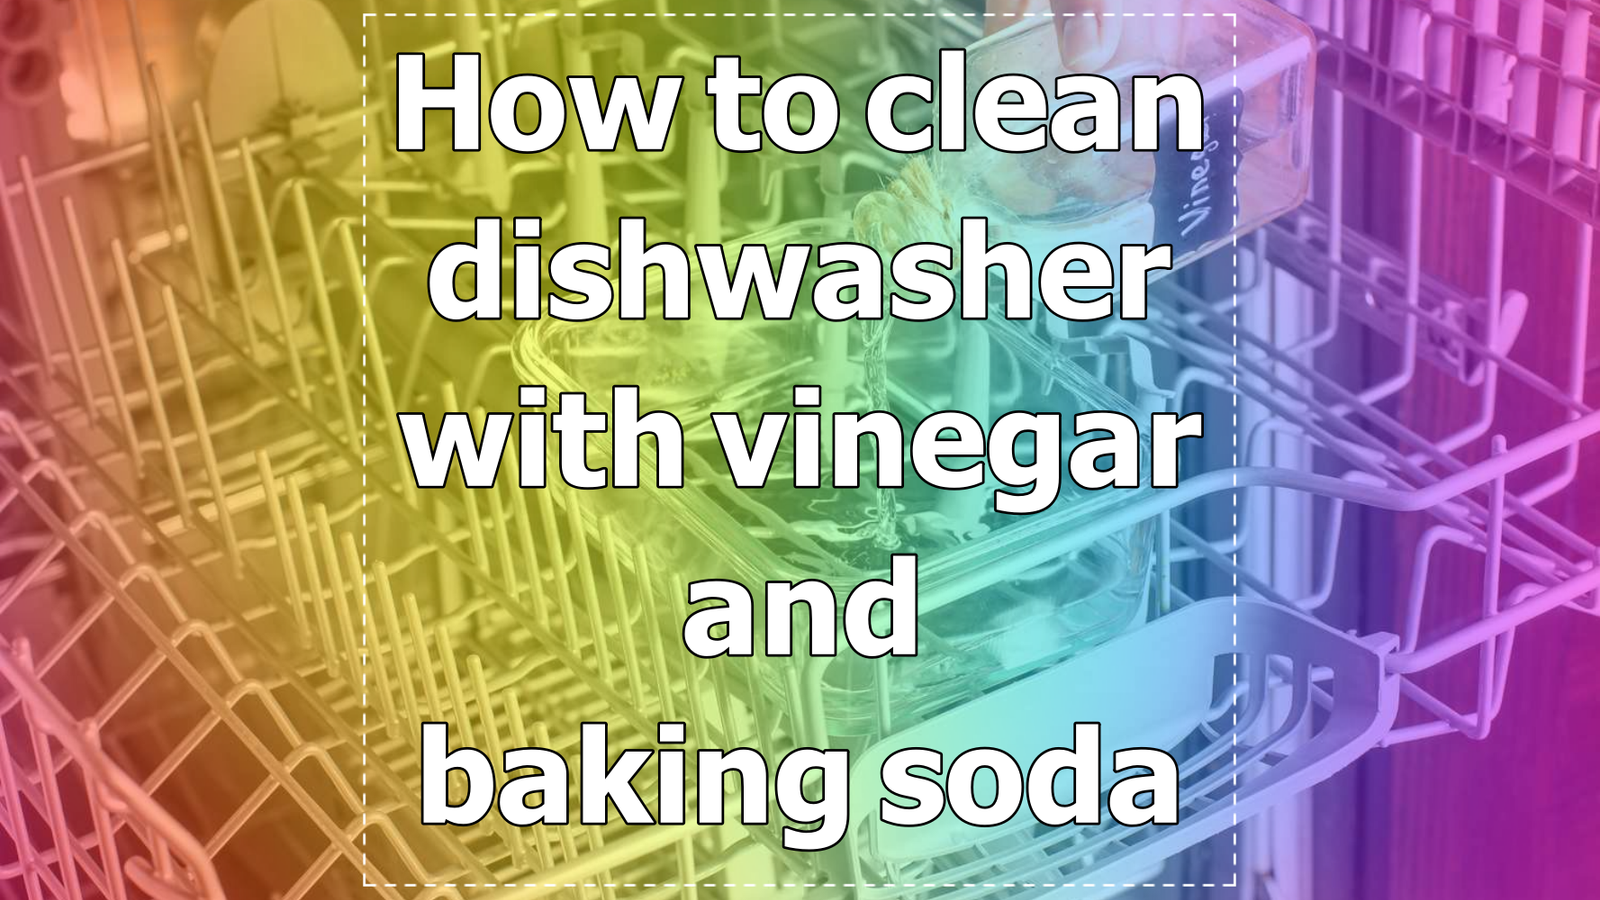 How to clean dishwasher with vinegar and baking soda